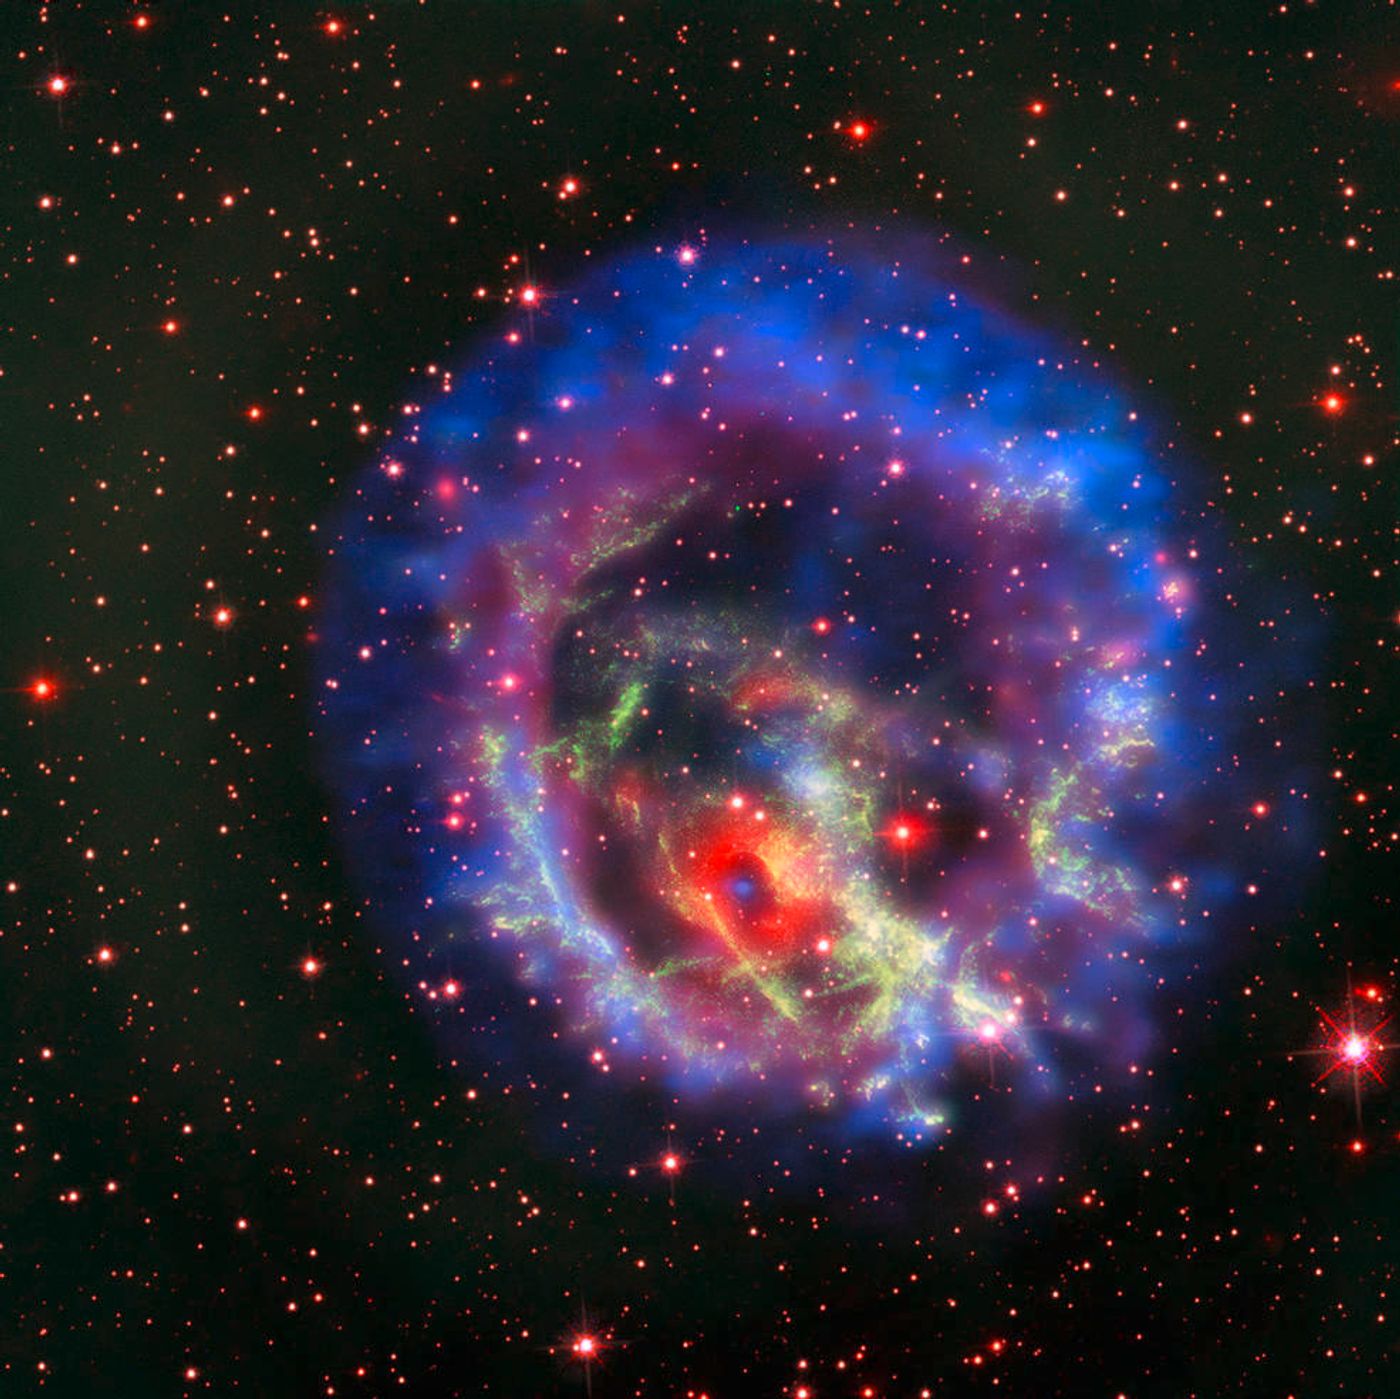 A composite image showing 1E 0102.2-7219 in all its glory.